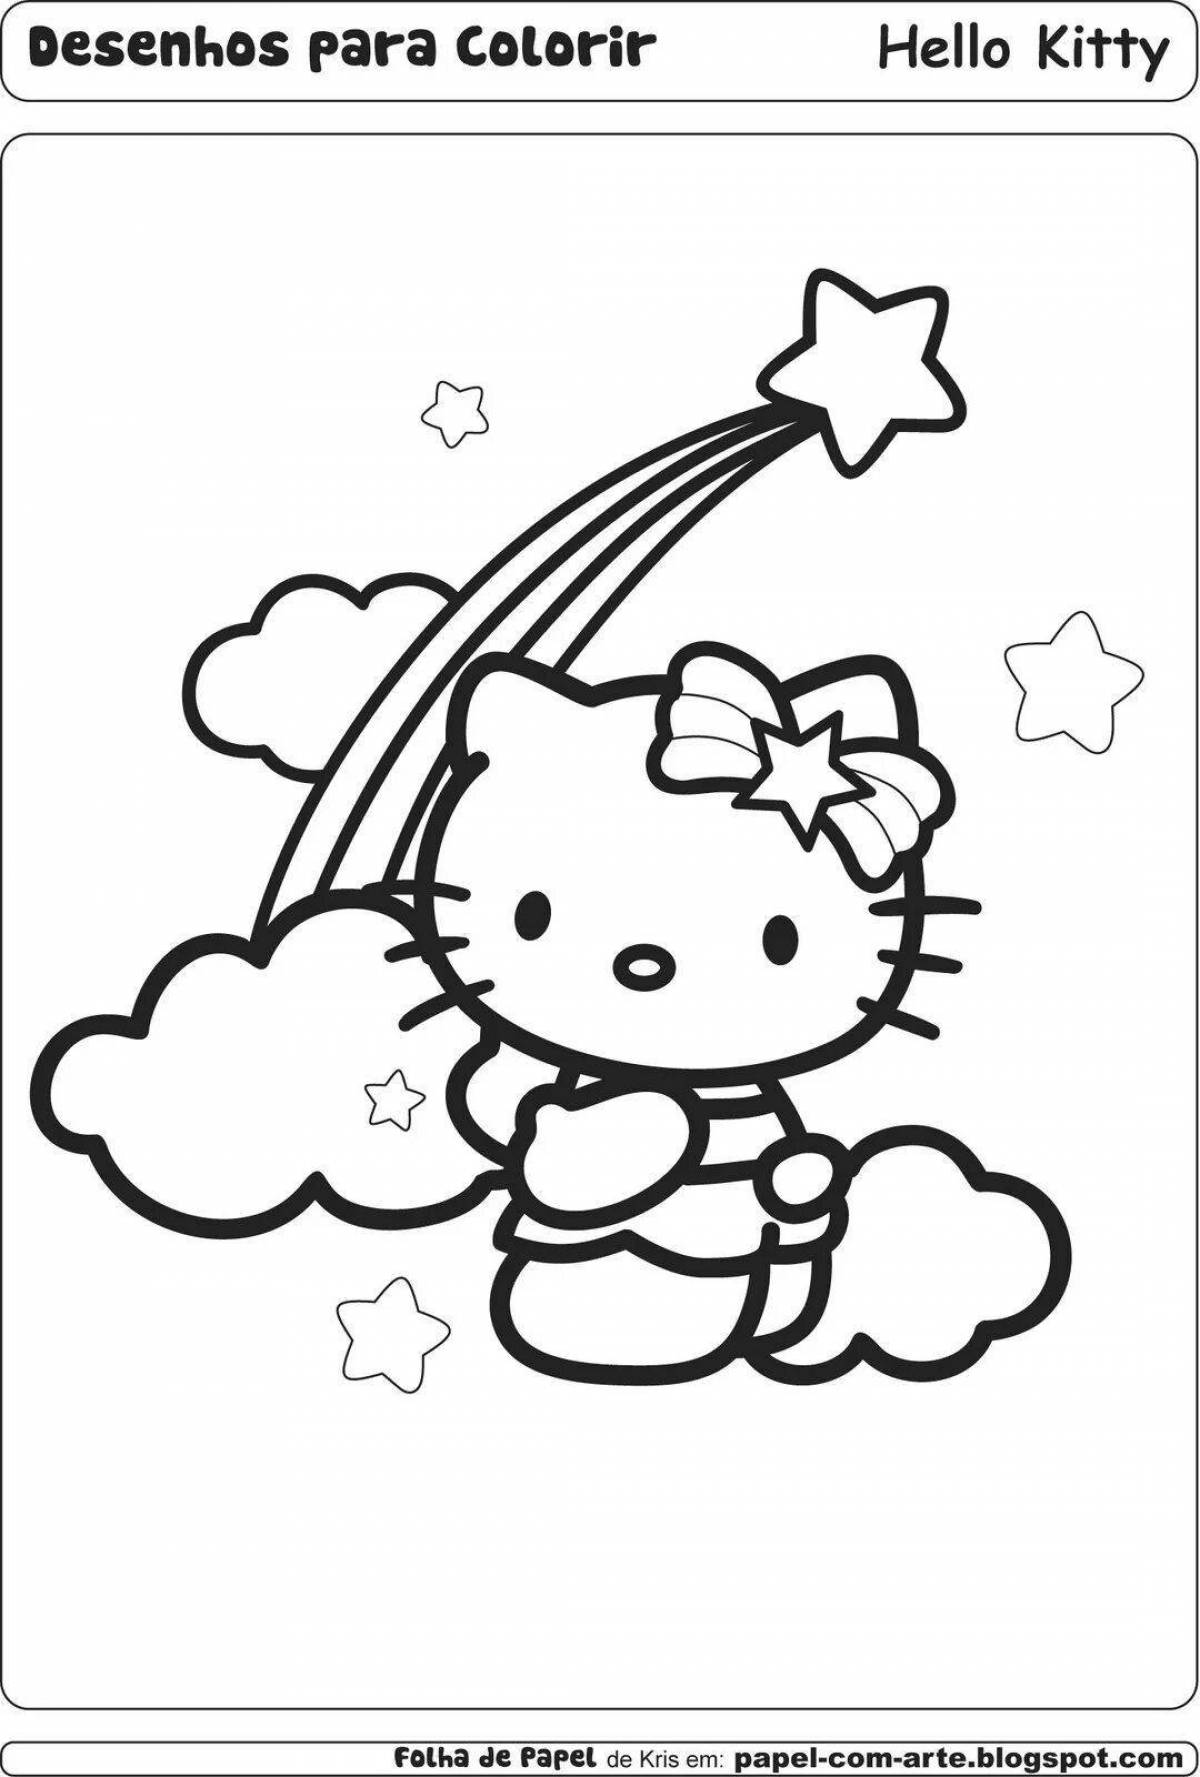 Milady coloring playtime from hello kitty